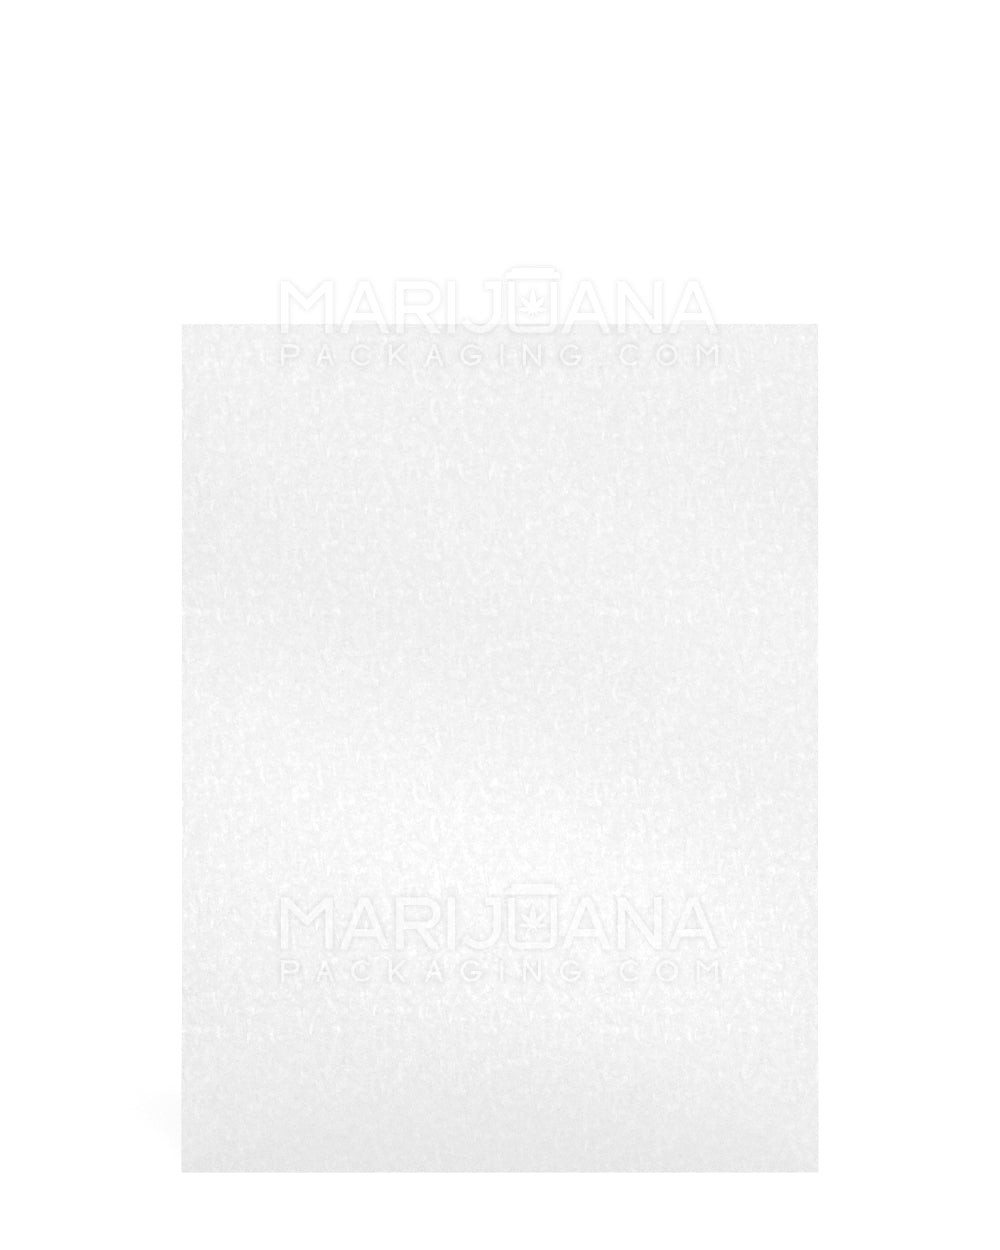 Silicone Coated Parchment Paper | 12in x 16in - Bleached White - 100 Count - 3